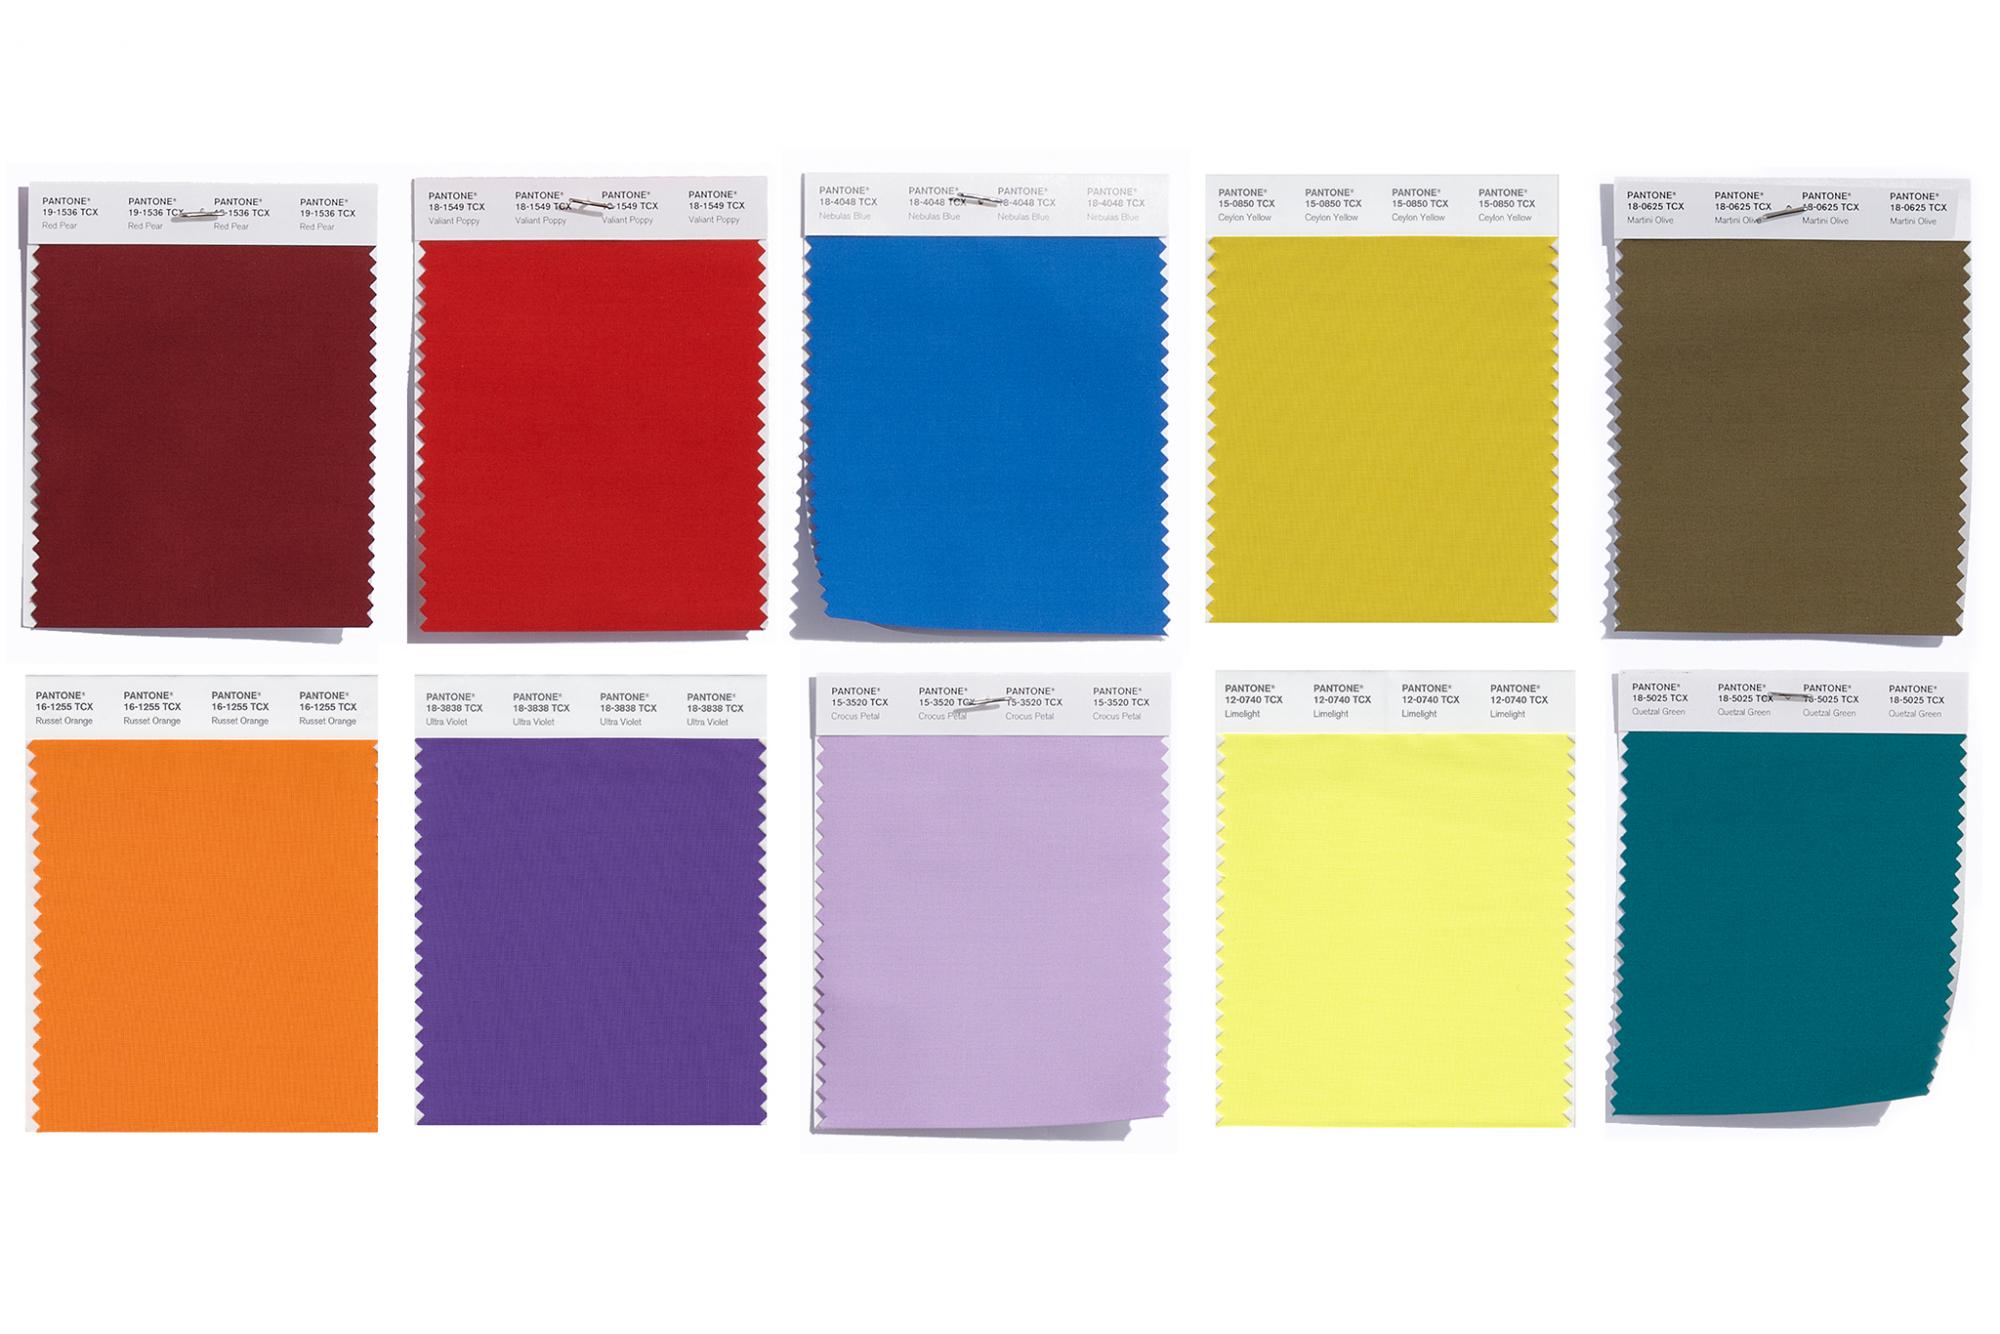 Fall 2018 Pantone swatches in various colors.